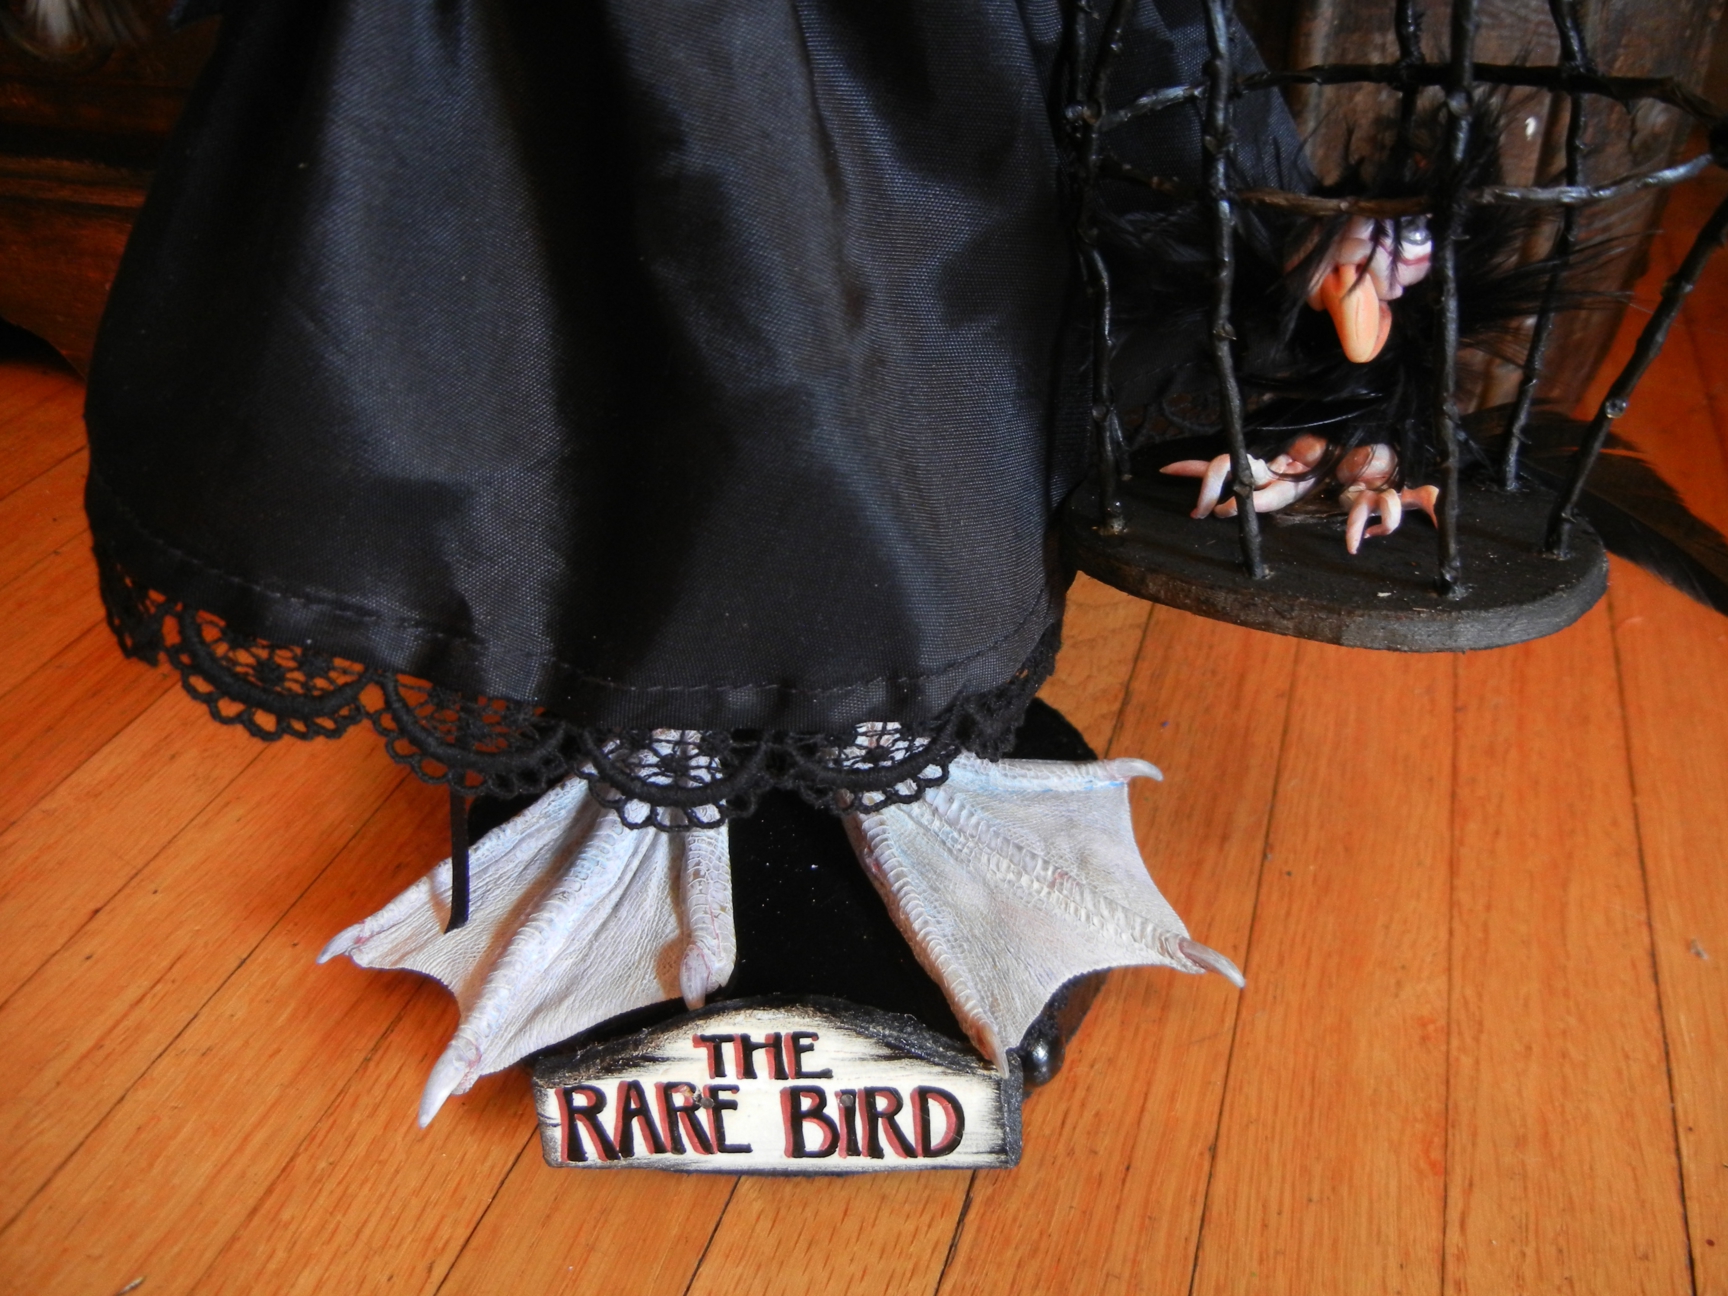 doll with taxidermy webbed bird feet standing on a wooden platform with a handpainted sign that says The Rare Bird